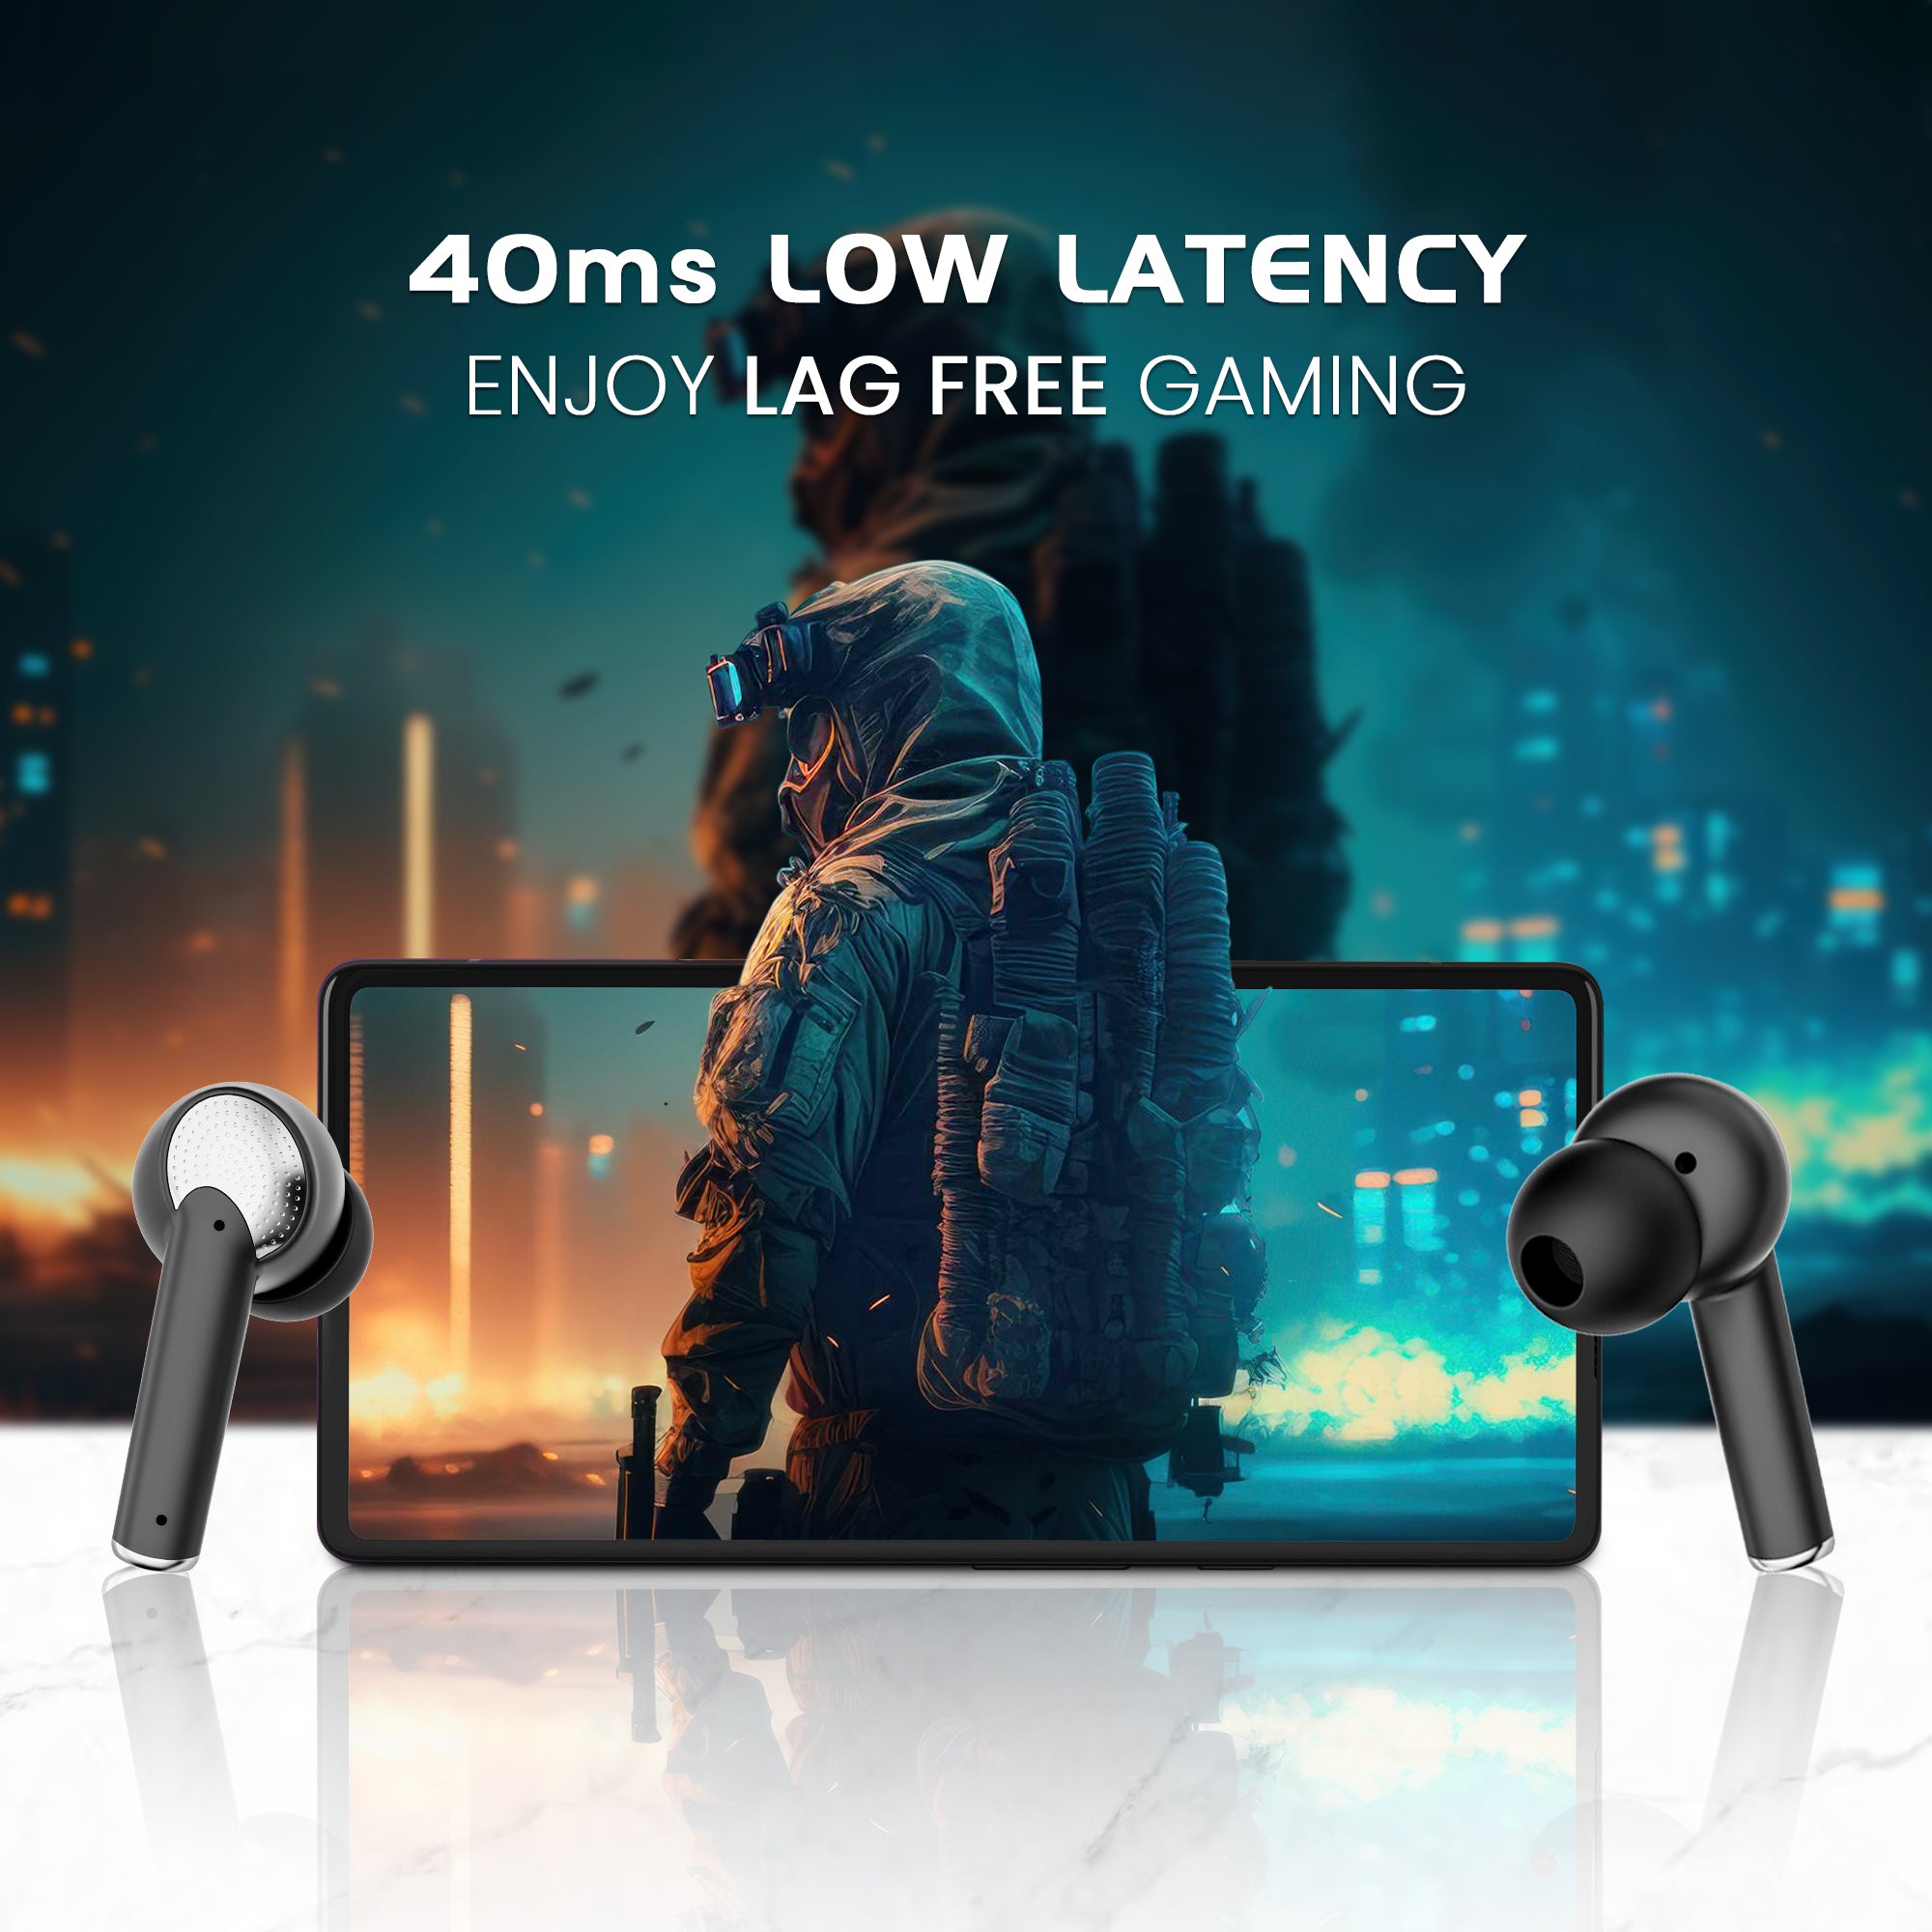 GIZMORE ELITE 852 ANC with 36dB Type-C Fast Charging TWS| Up to 50H Playtime| ENC with DNS | 40ms Low Latency for Gaming | Insta Wake N’ Pair |BT v5.3| 13MM Driver| Voice Assistant Earbuds